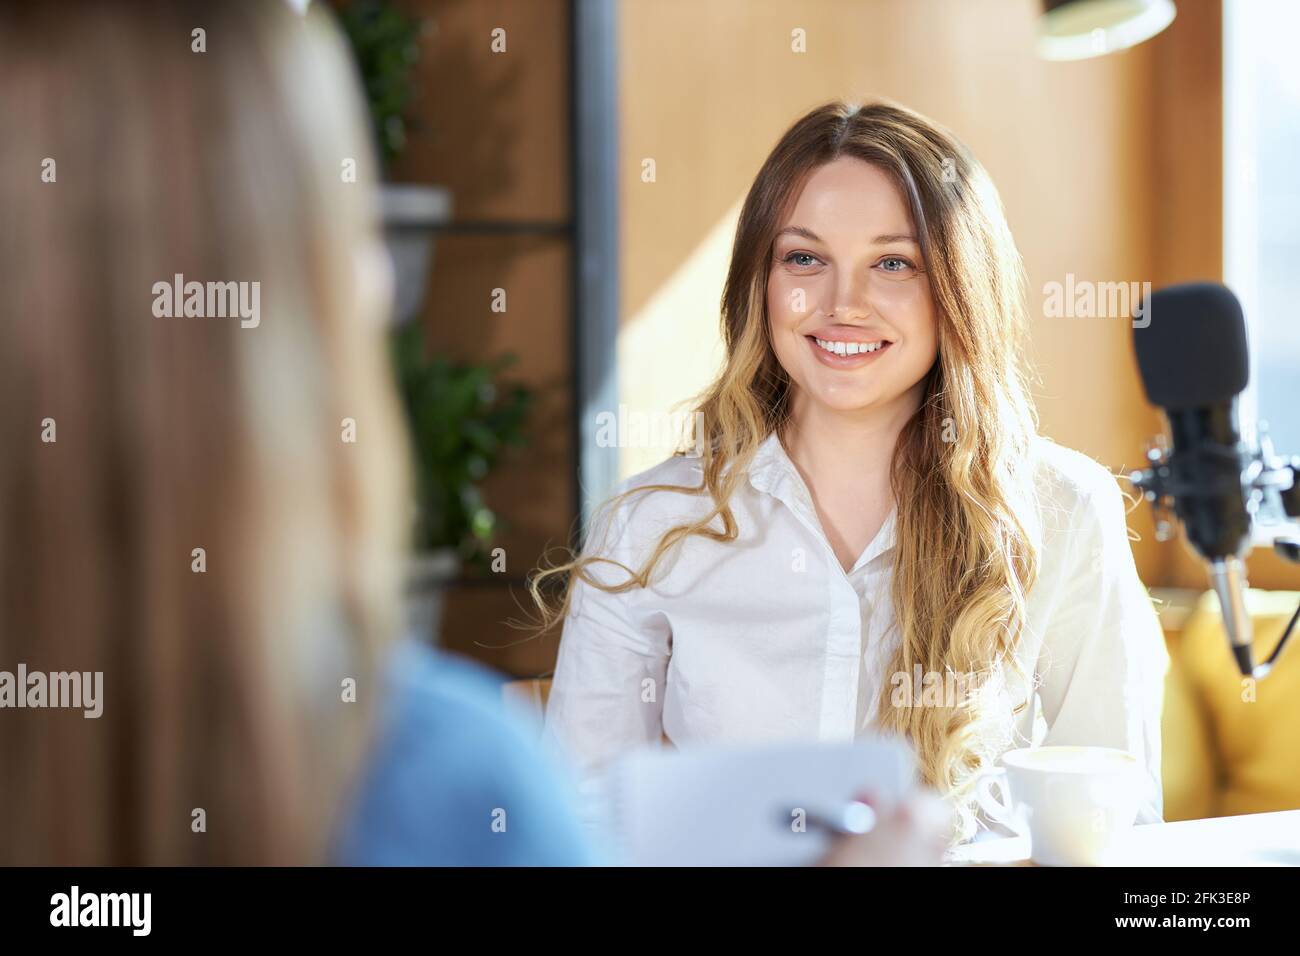 Front view portrait of smiling beautiful young woman giving interview in modern microphone with tasty coffee in cafe. Concept of process communicating about different topics with good mood.  Stock Photo